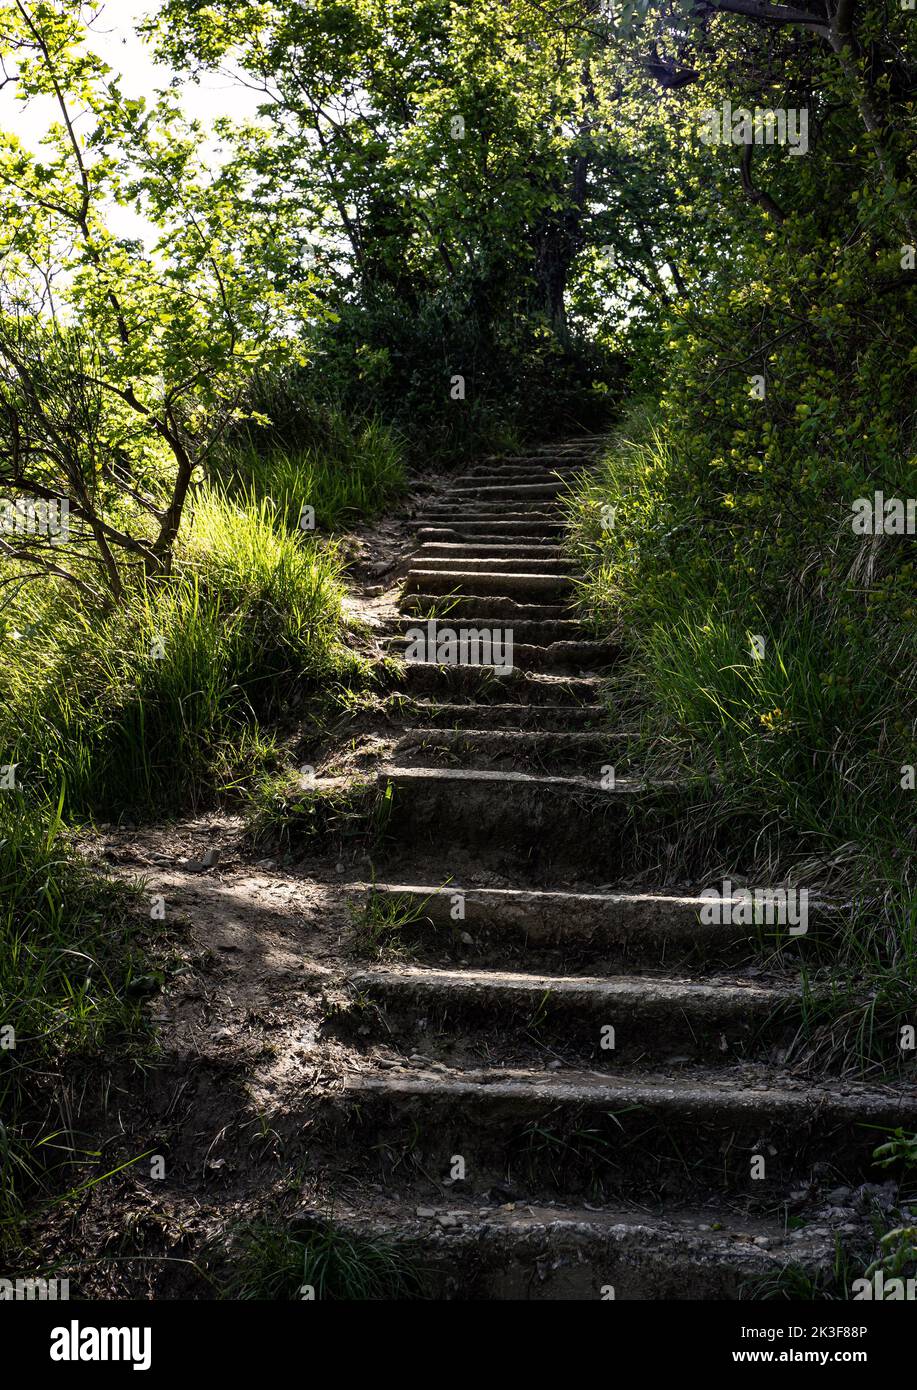 Steps in the natural environment leading somewhere in the uphill. Stock Photo